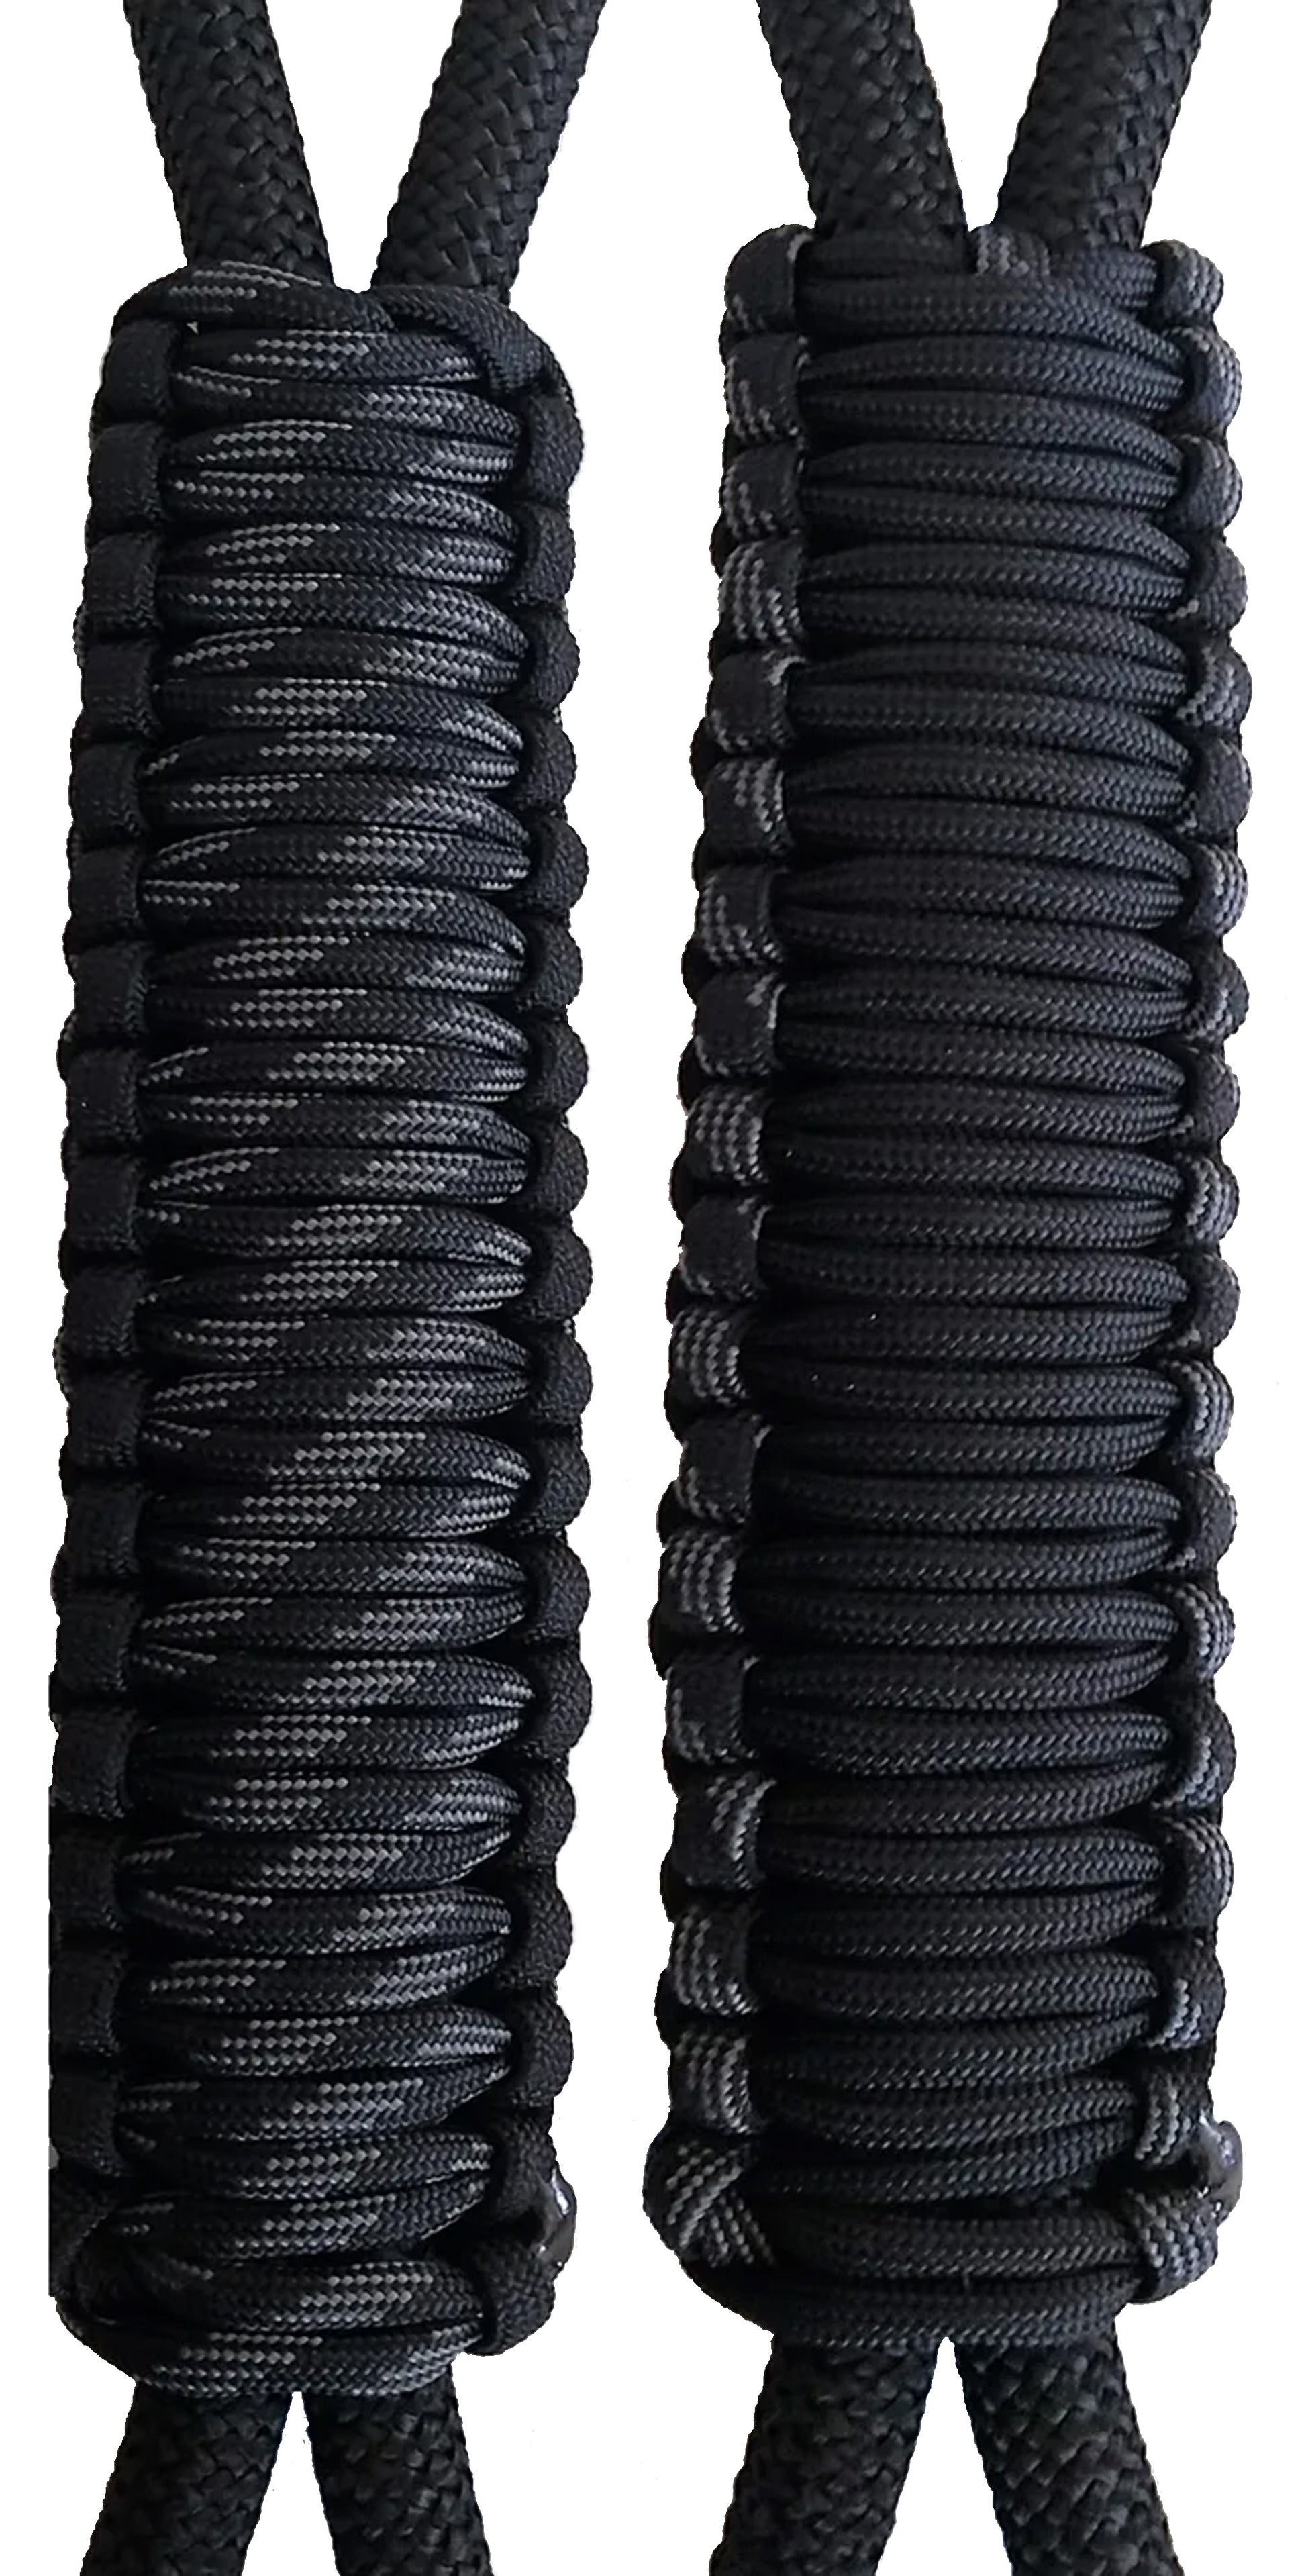 Black & Touch of Gray C031C070 - Paracord Handmade Handles for Stainless Steel Tumblers - Made in USA!